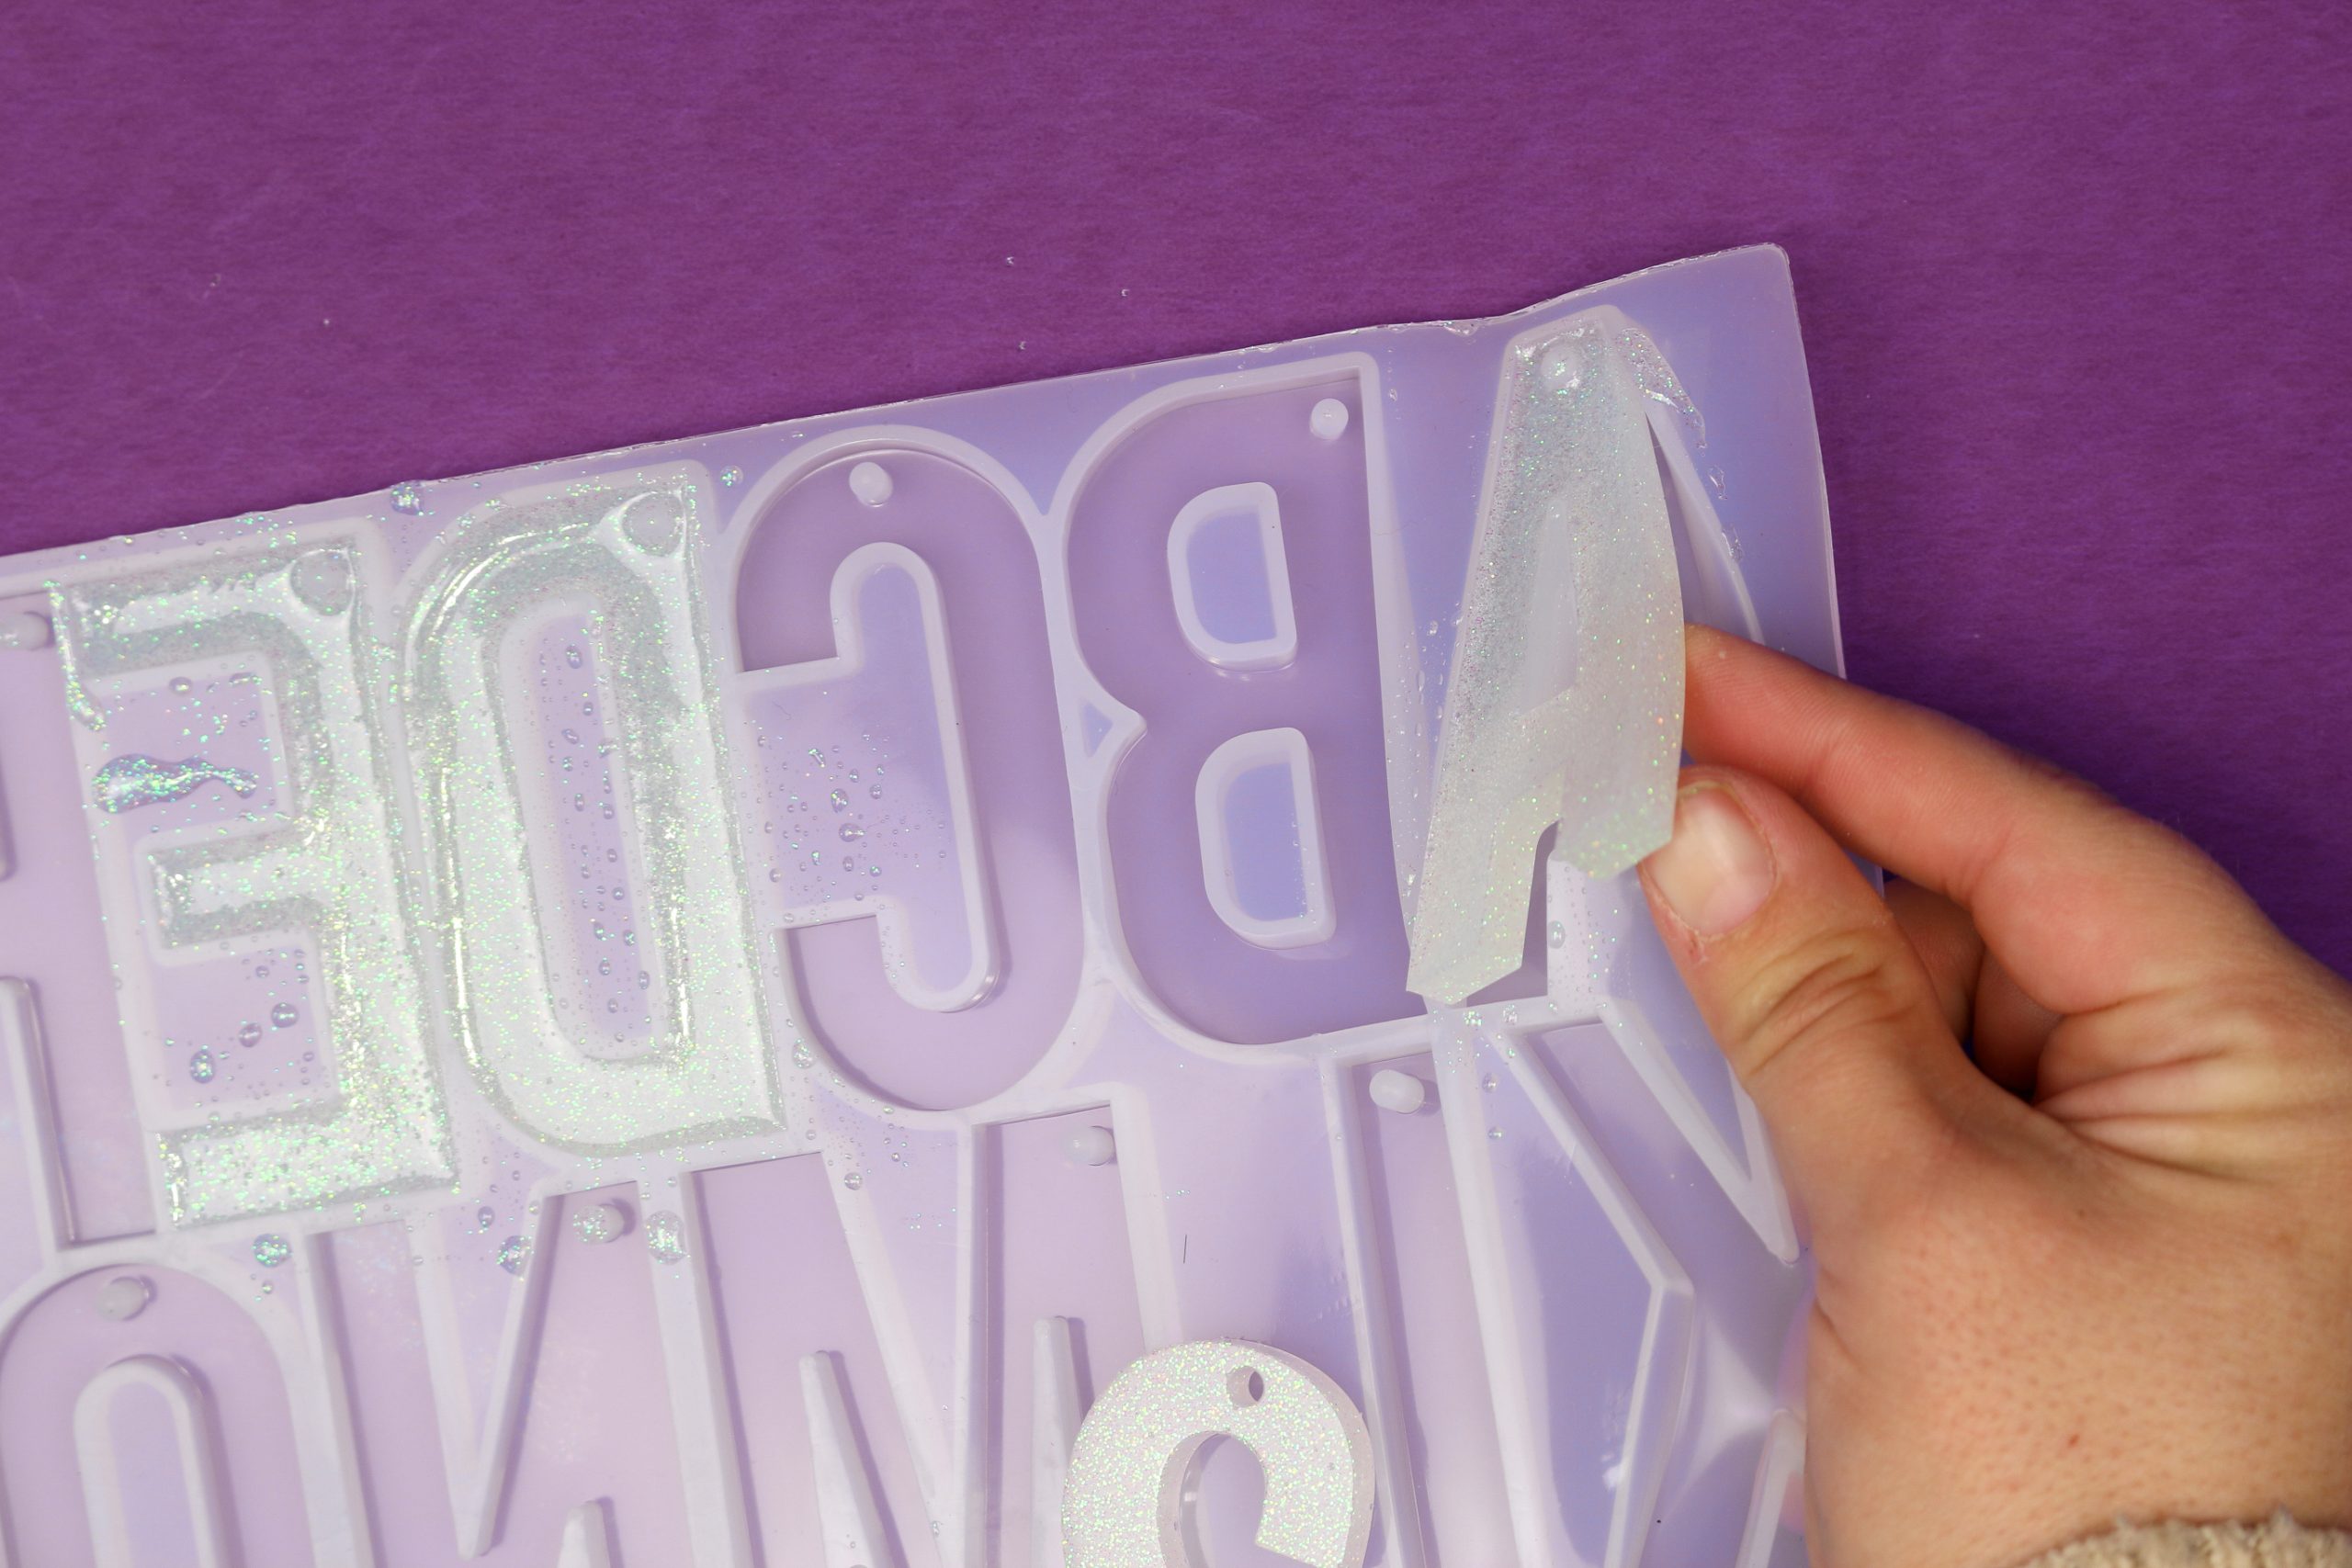 white woman's hand removing a resin letter from a silicone alphabet mold